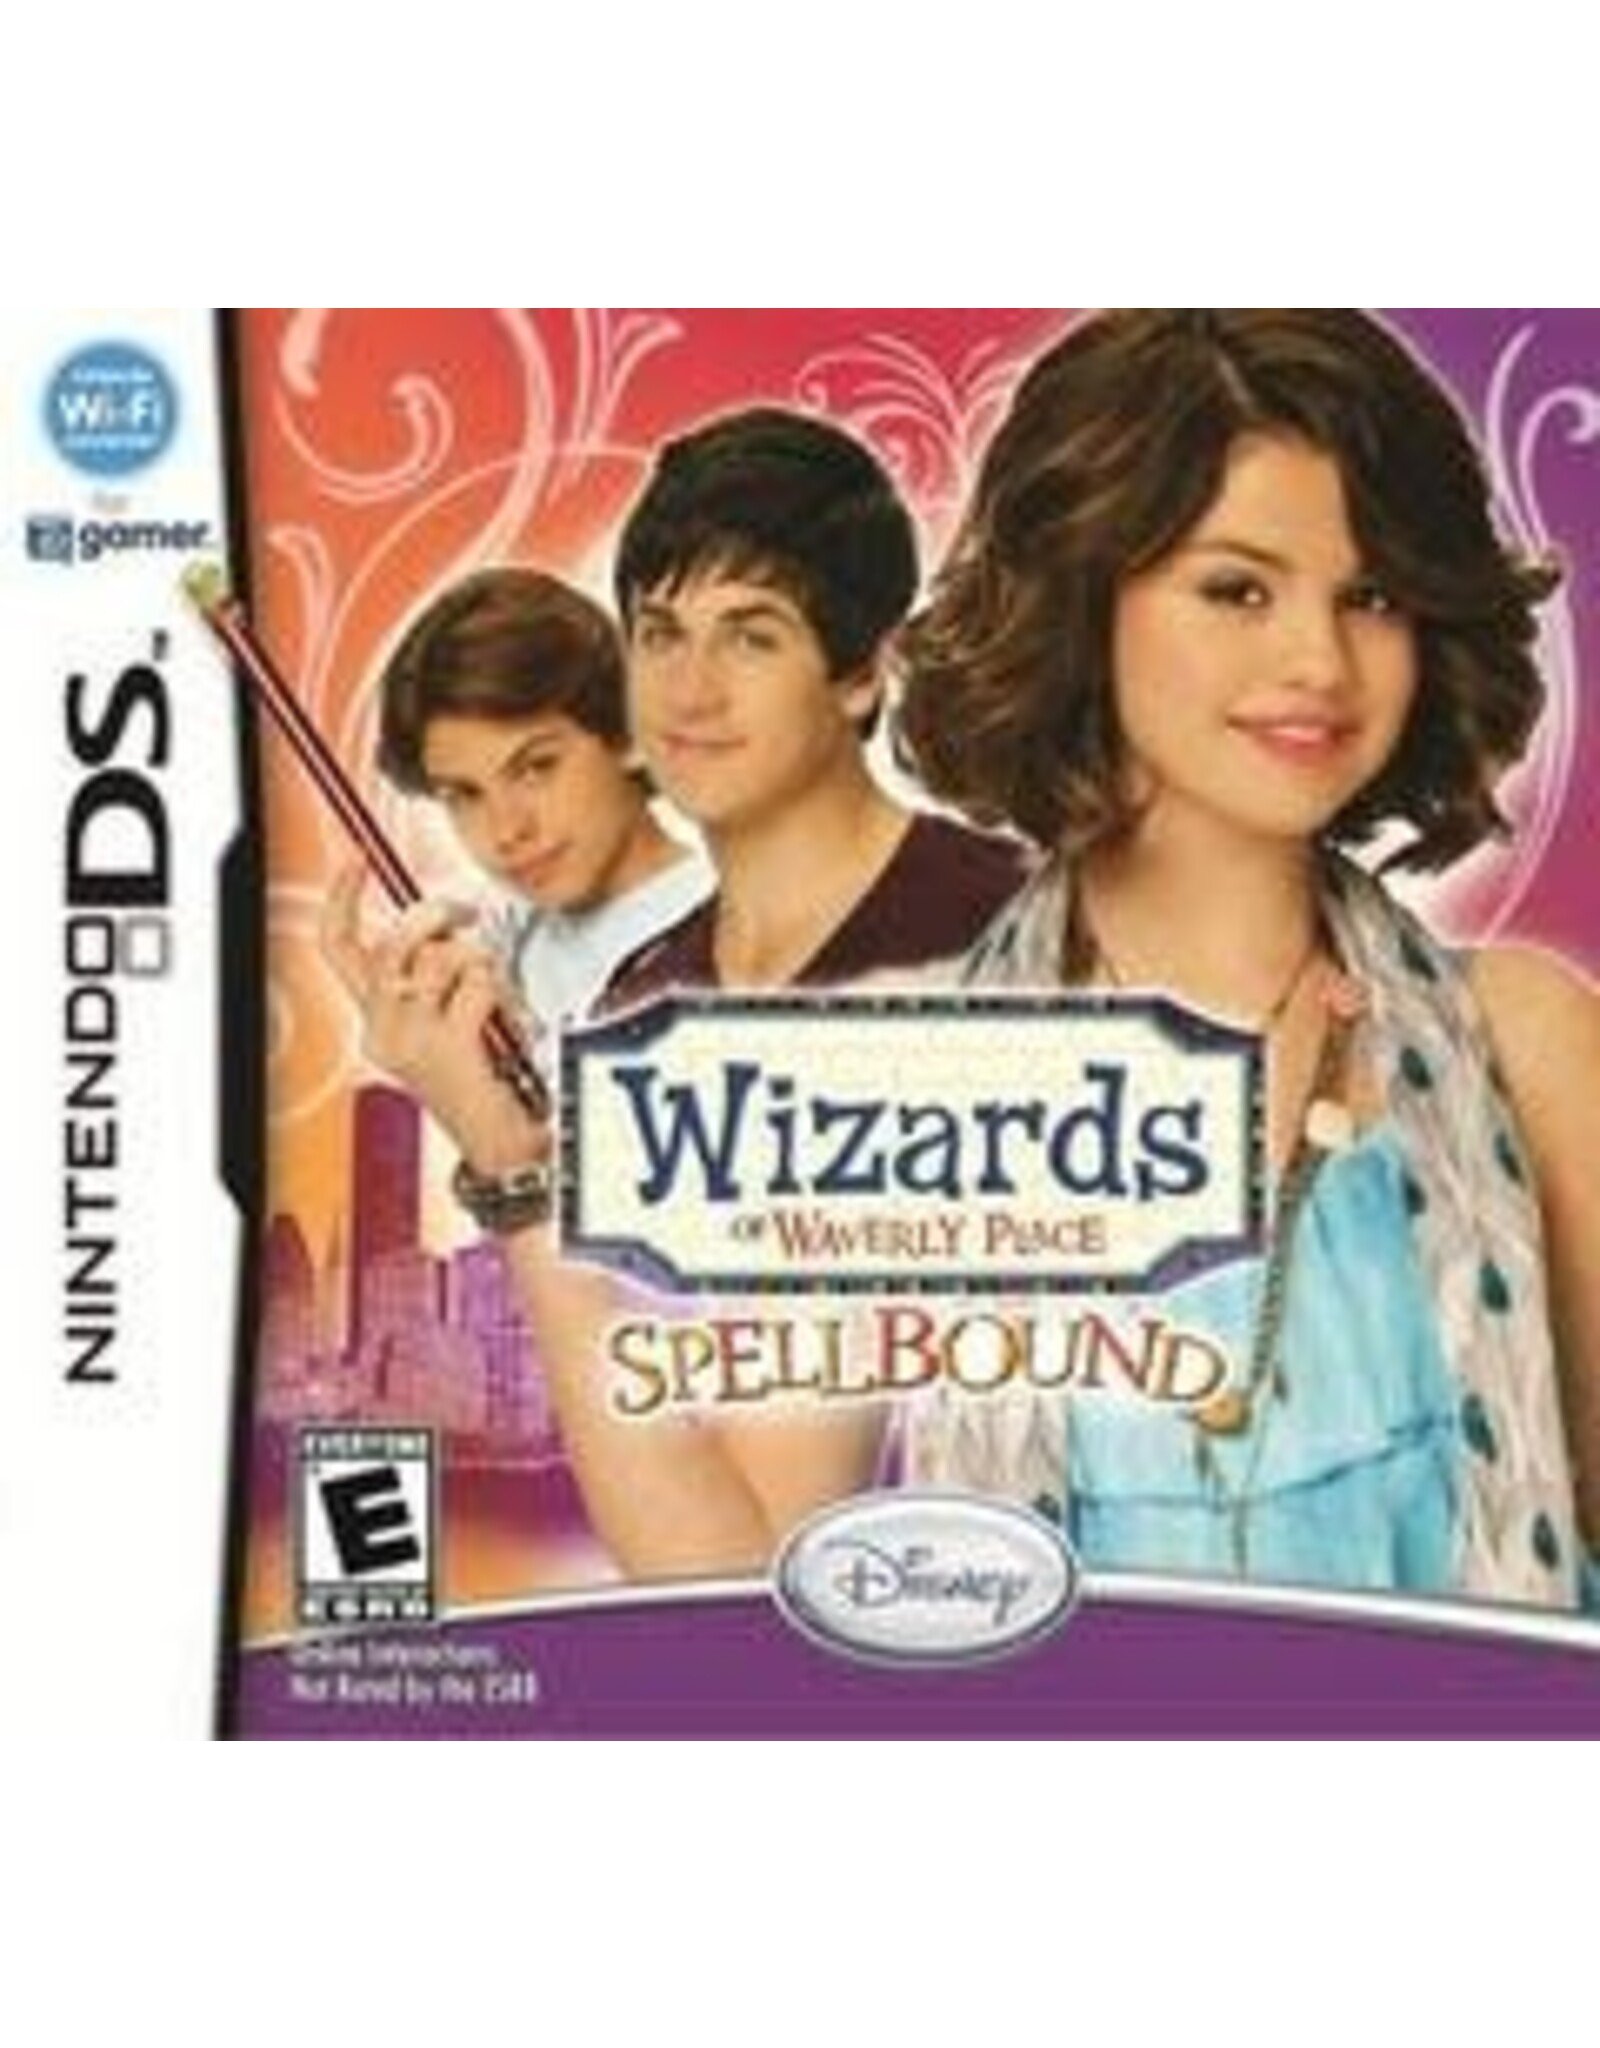 Nintendo DS Wizards of Waverly Place: Spellbound (Cart Only)